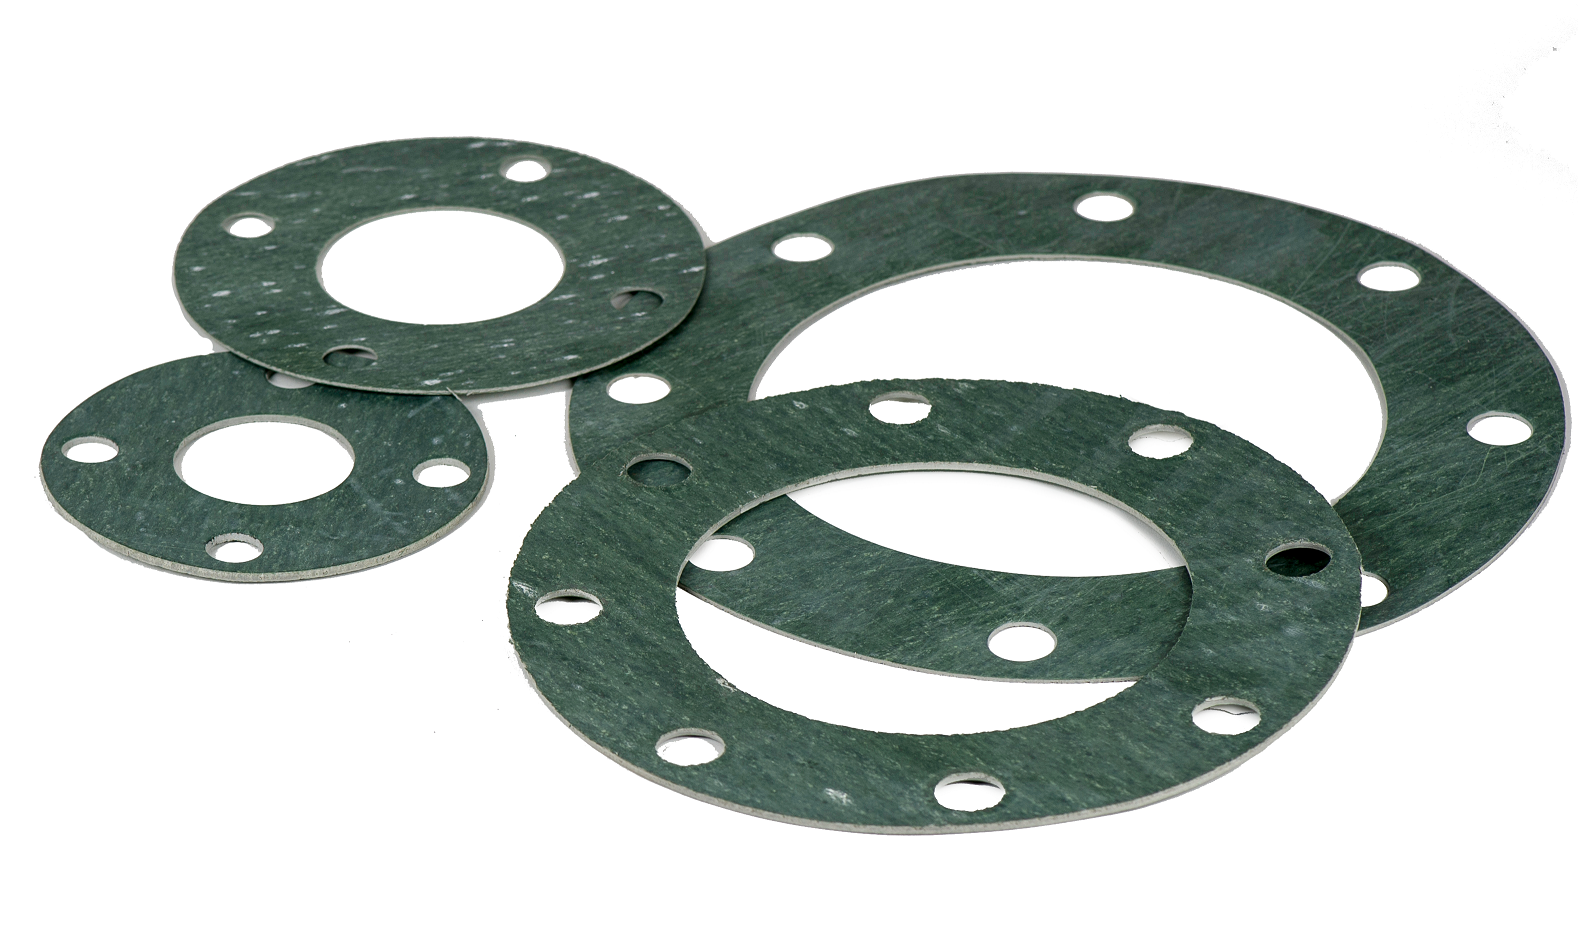 1 Gaskets in Piping Reference phelpgaskets.com types of pipe fittings